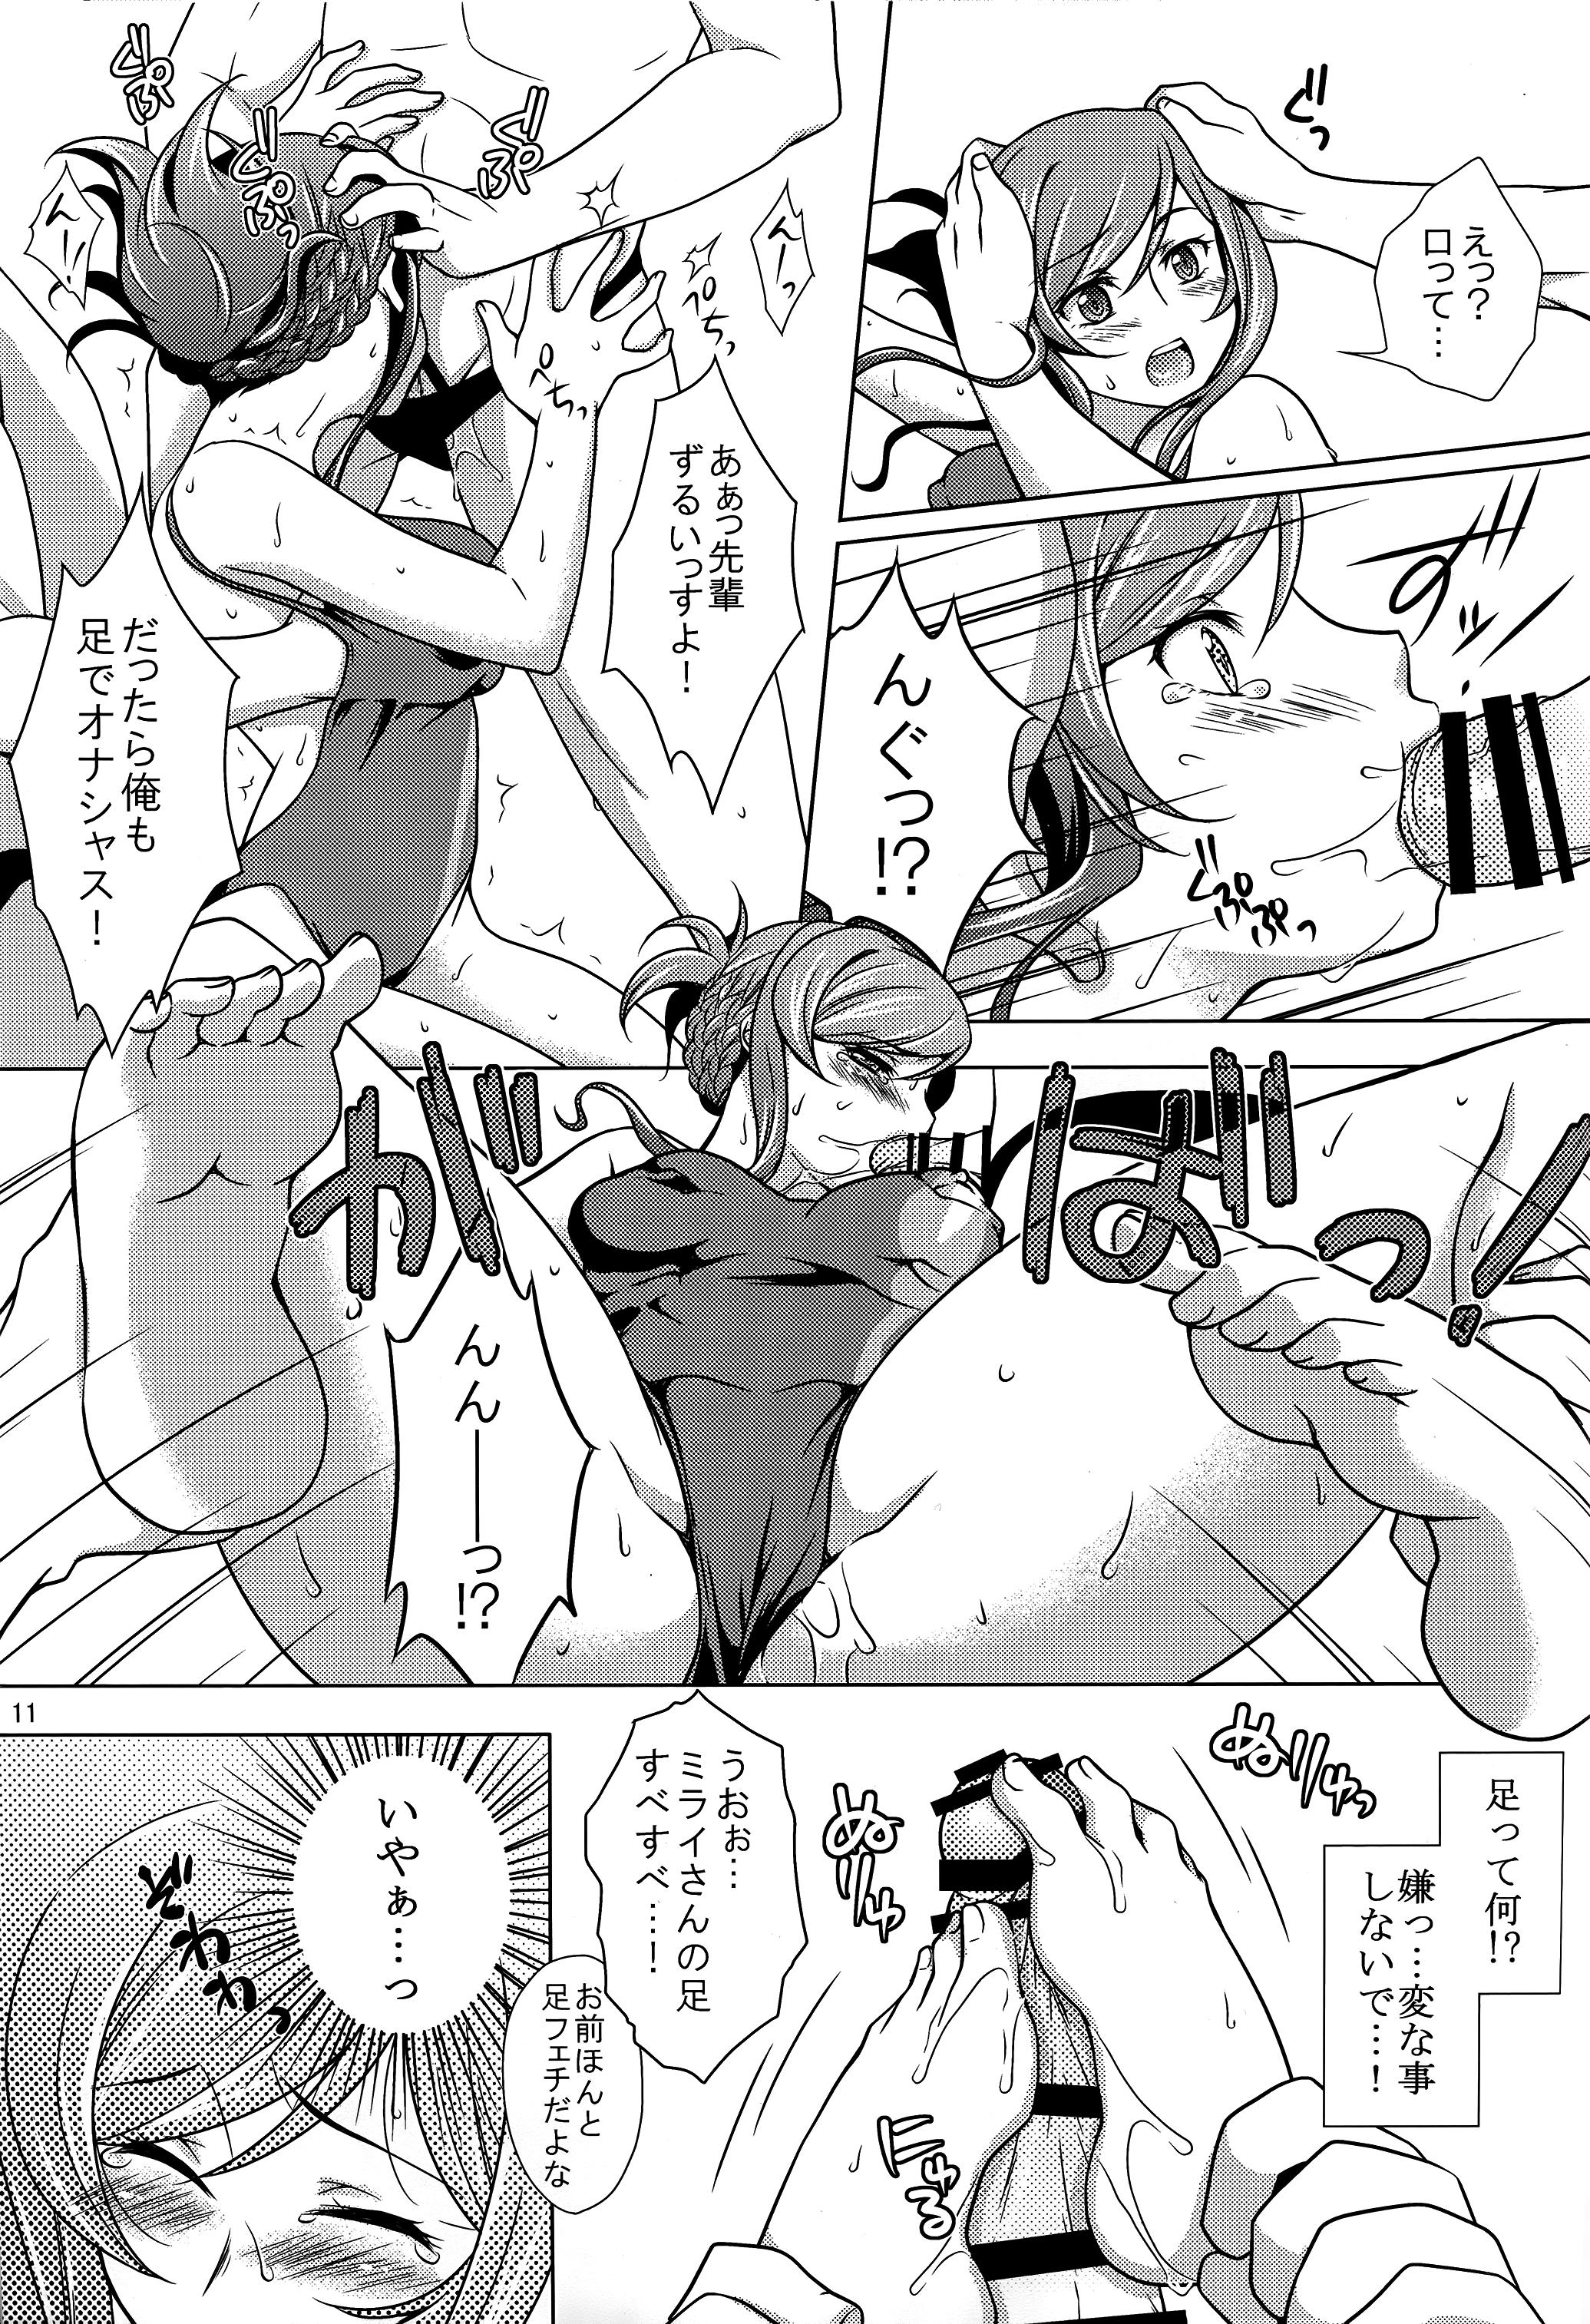 Stepsister FIELD?? POOLSIDE - Gundam build fighters try Gay Straight Boys - Page 11